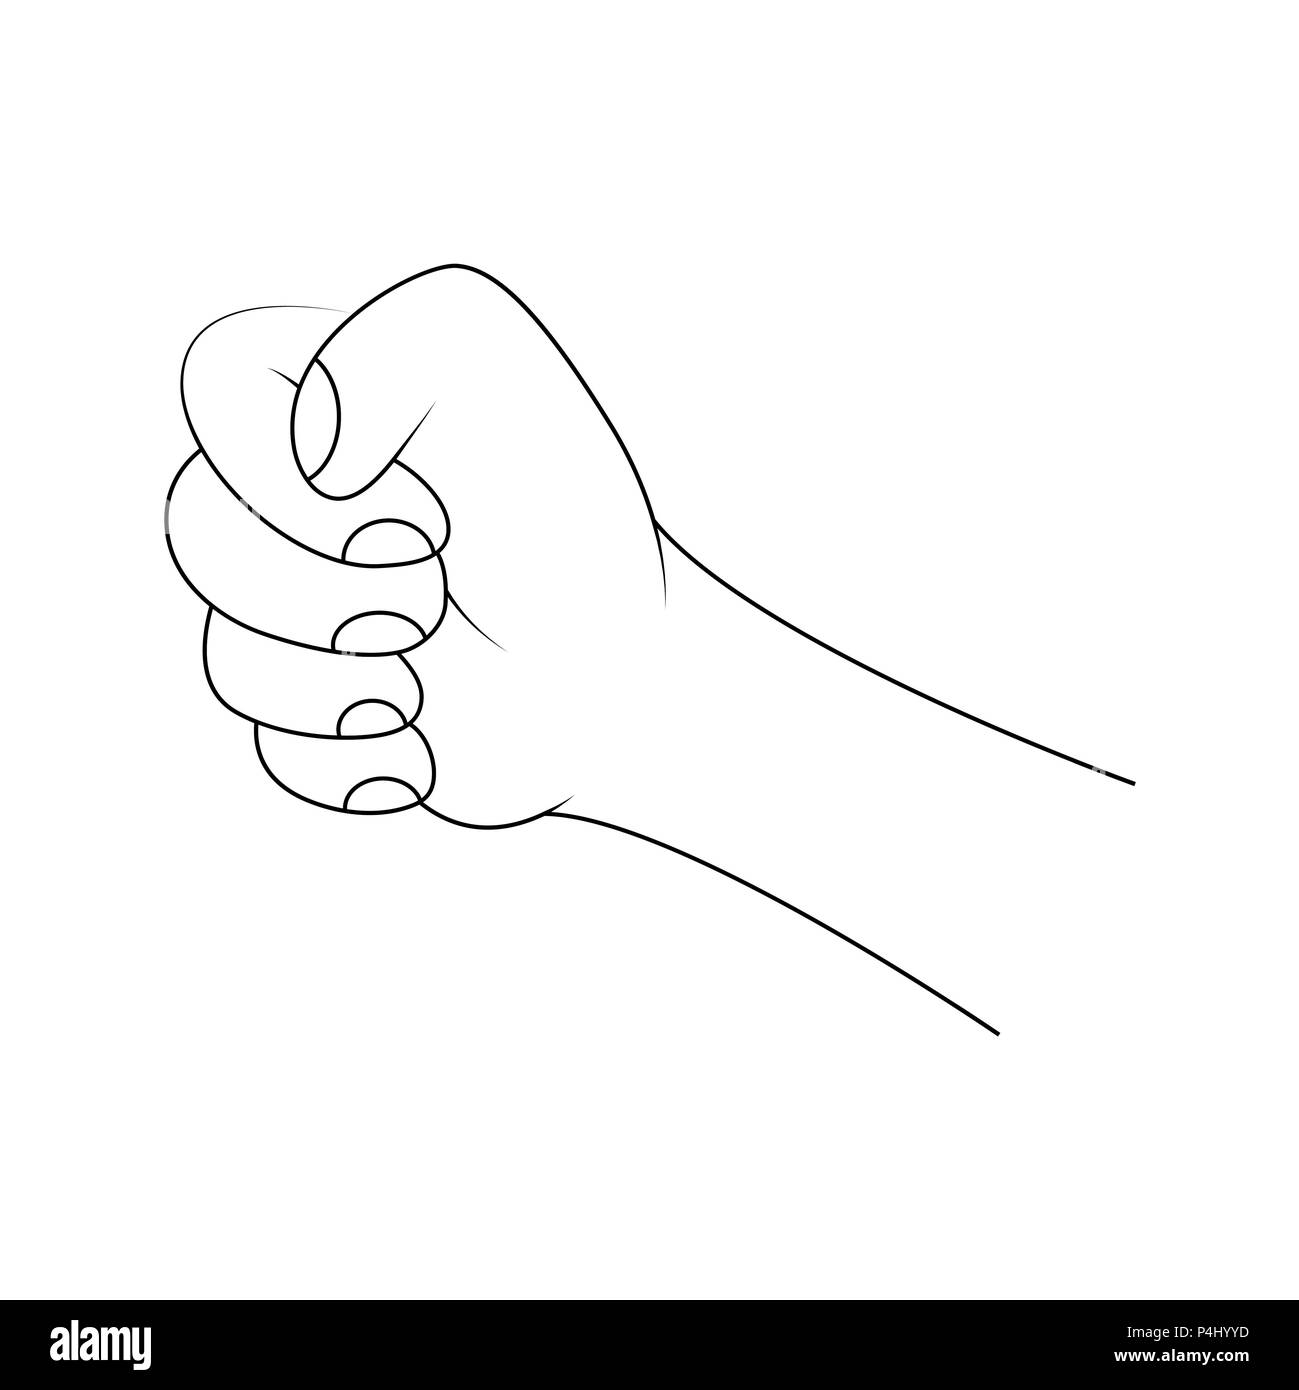 clenched fist,holding hand outline vector design isolated on white Stock Vector